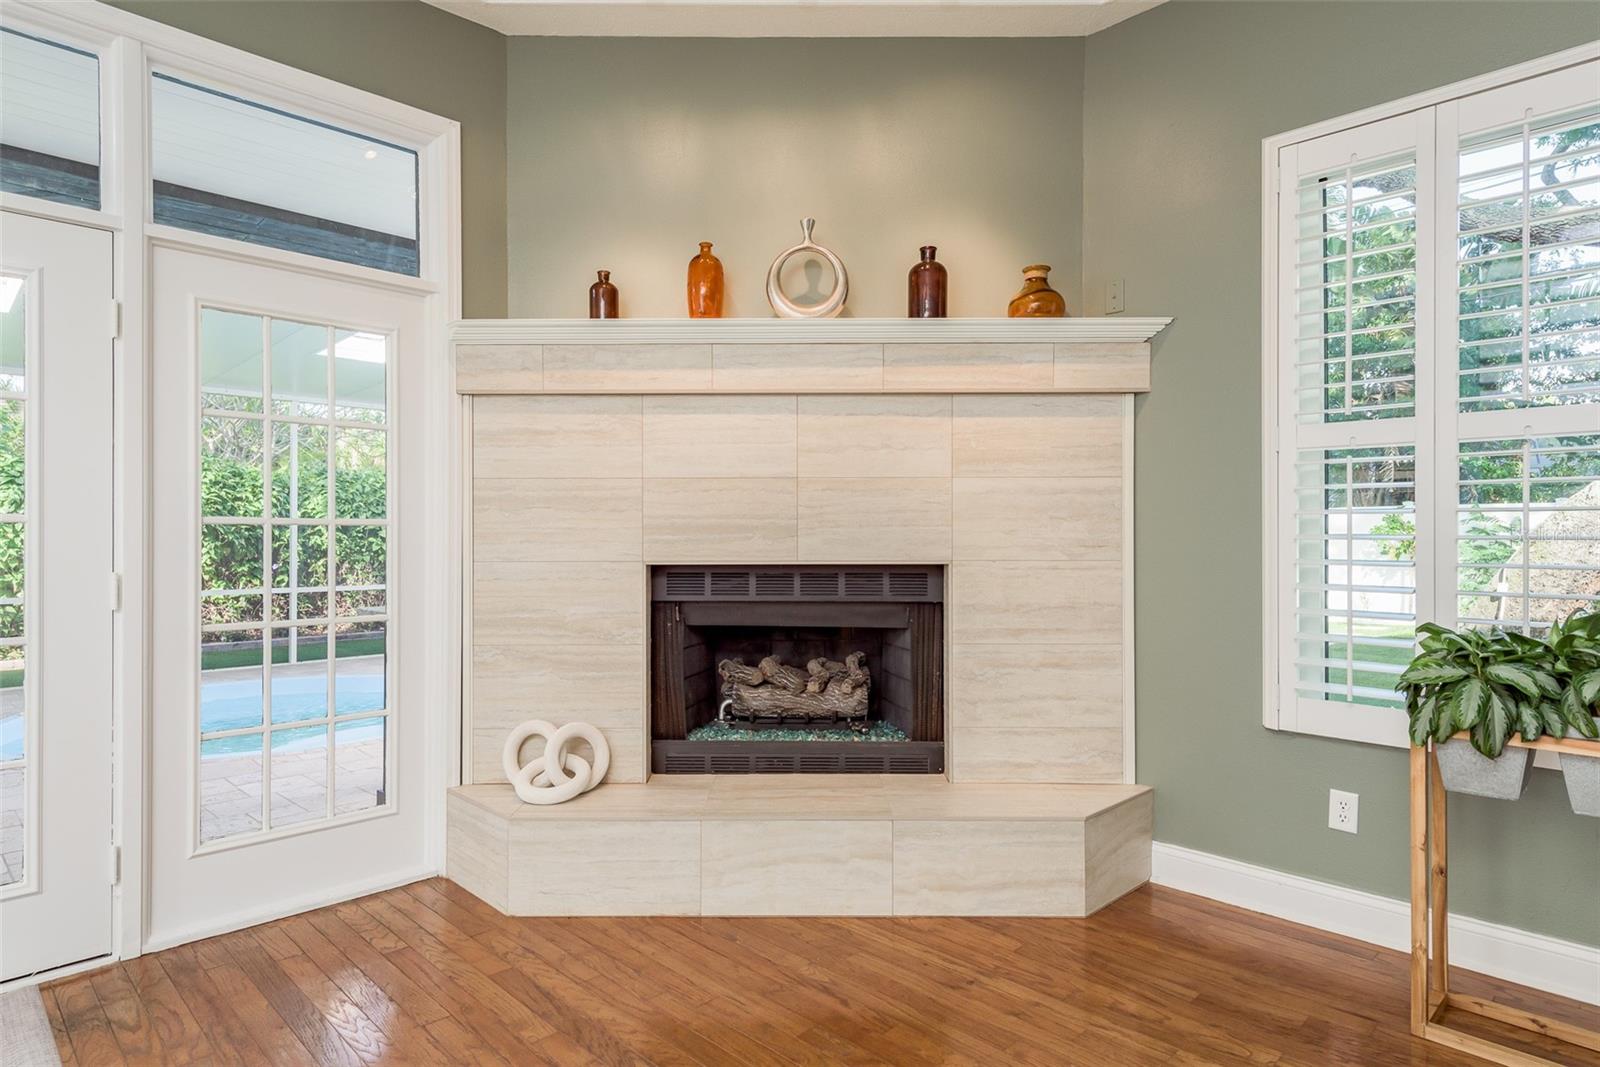 Gas or wood fireplace